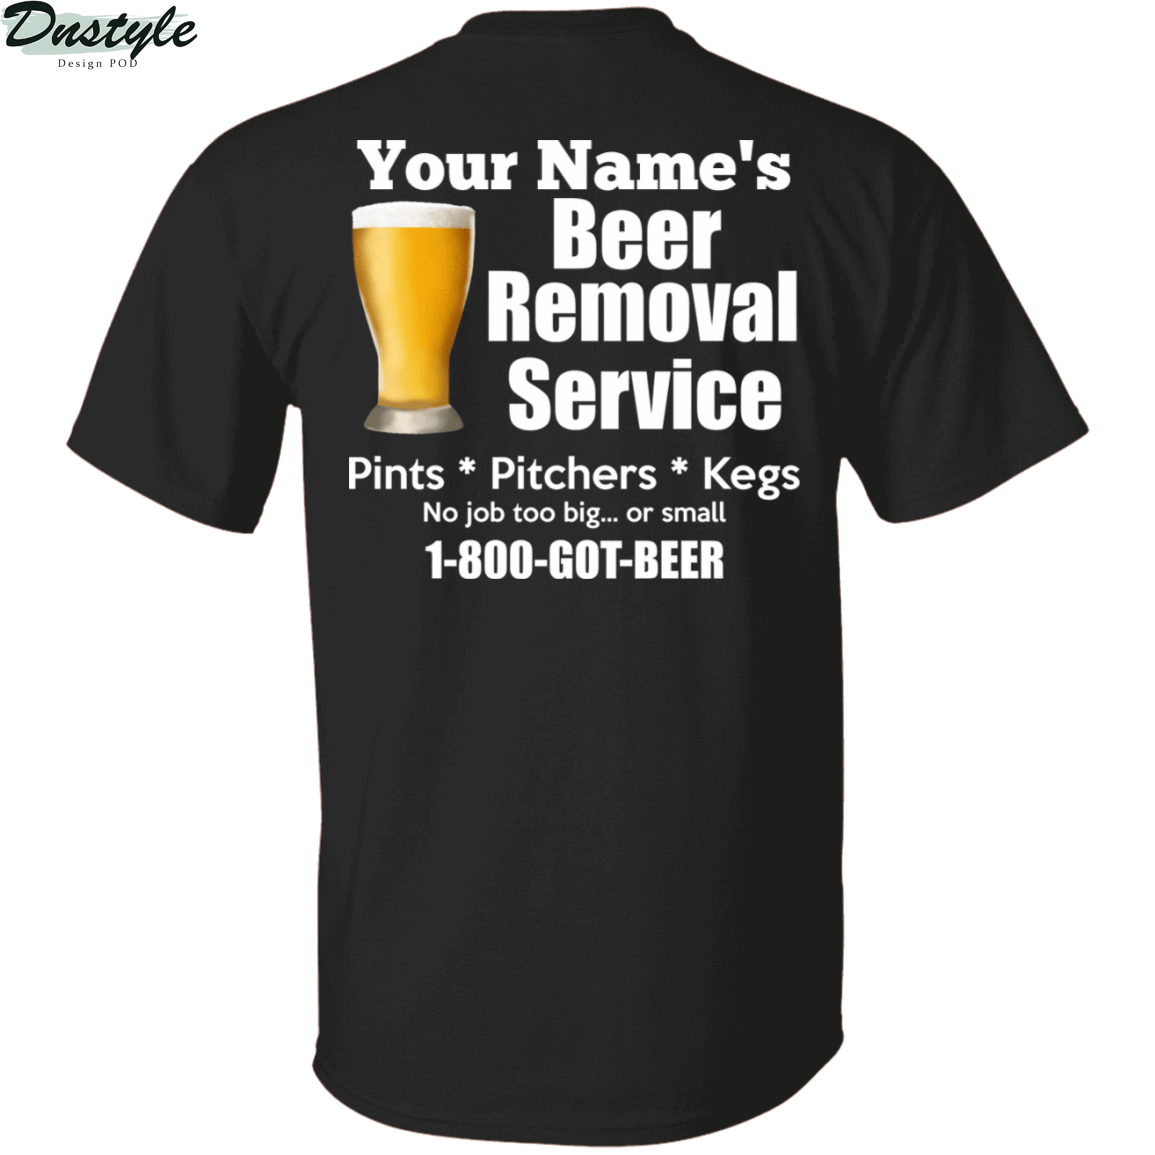 Personalized custom name beer removal service pints pitchers kegs shirt